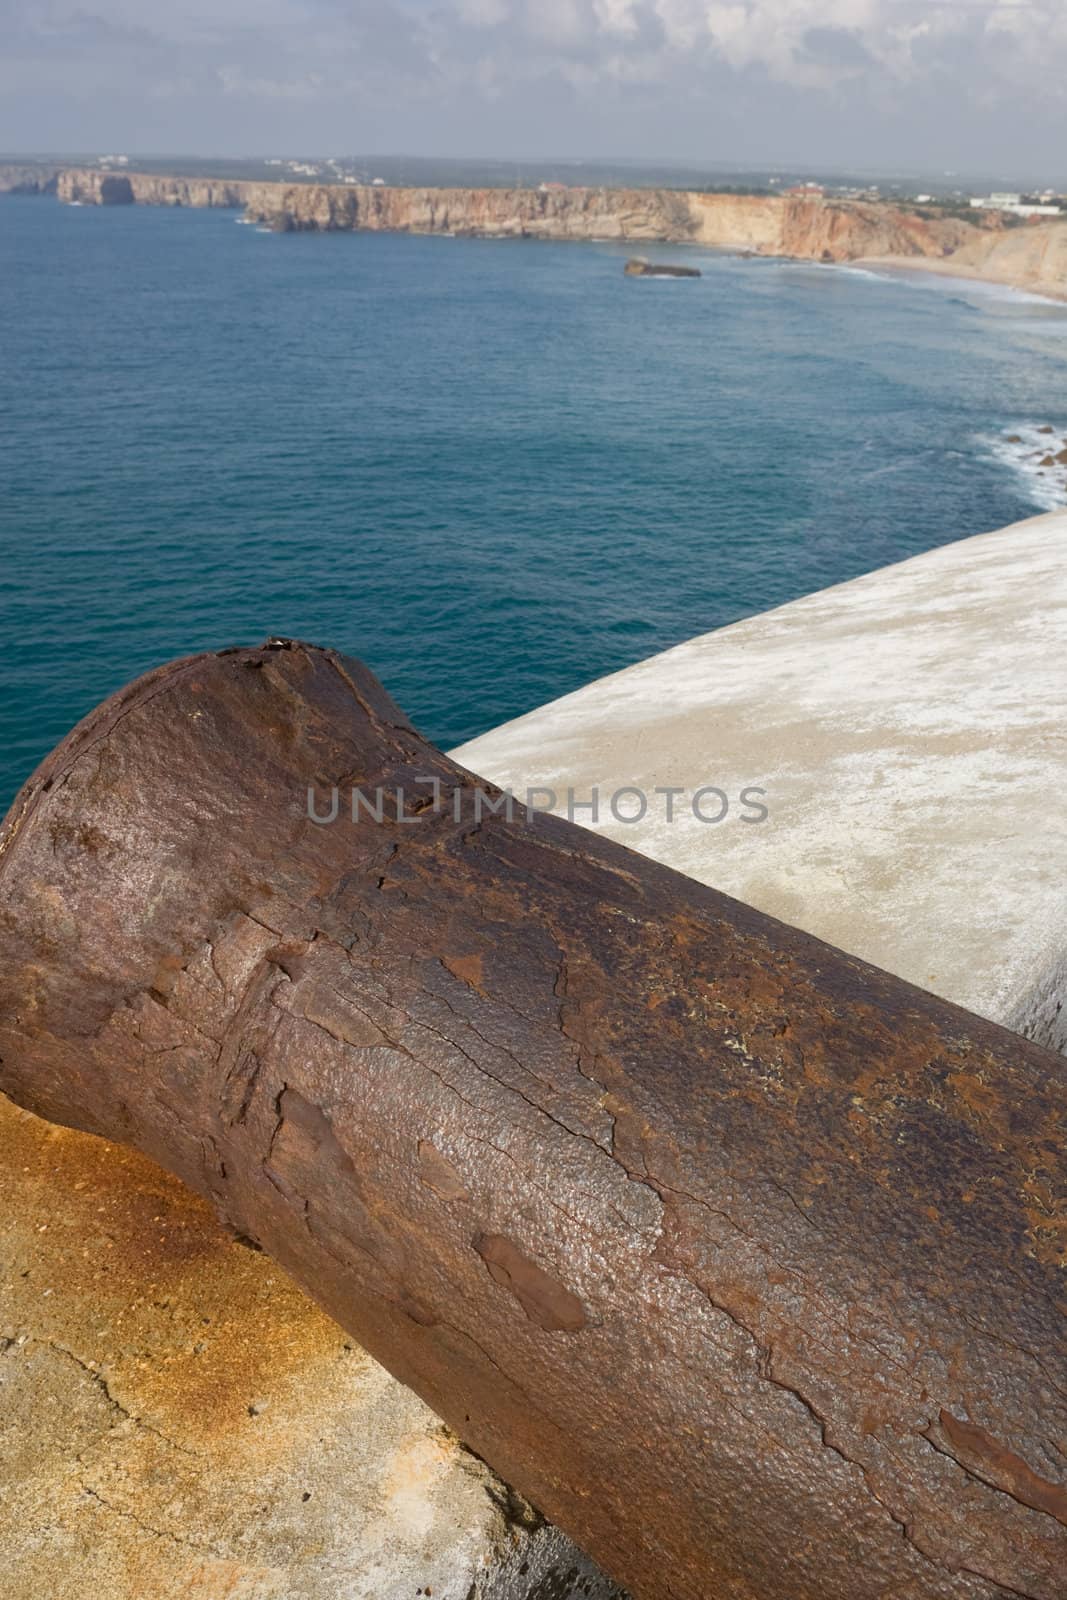 An old cannon which protects this fort from enemy ships.  Fortaleza de Sagres, Portugal